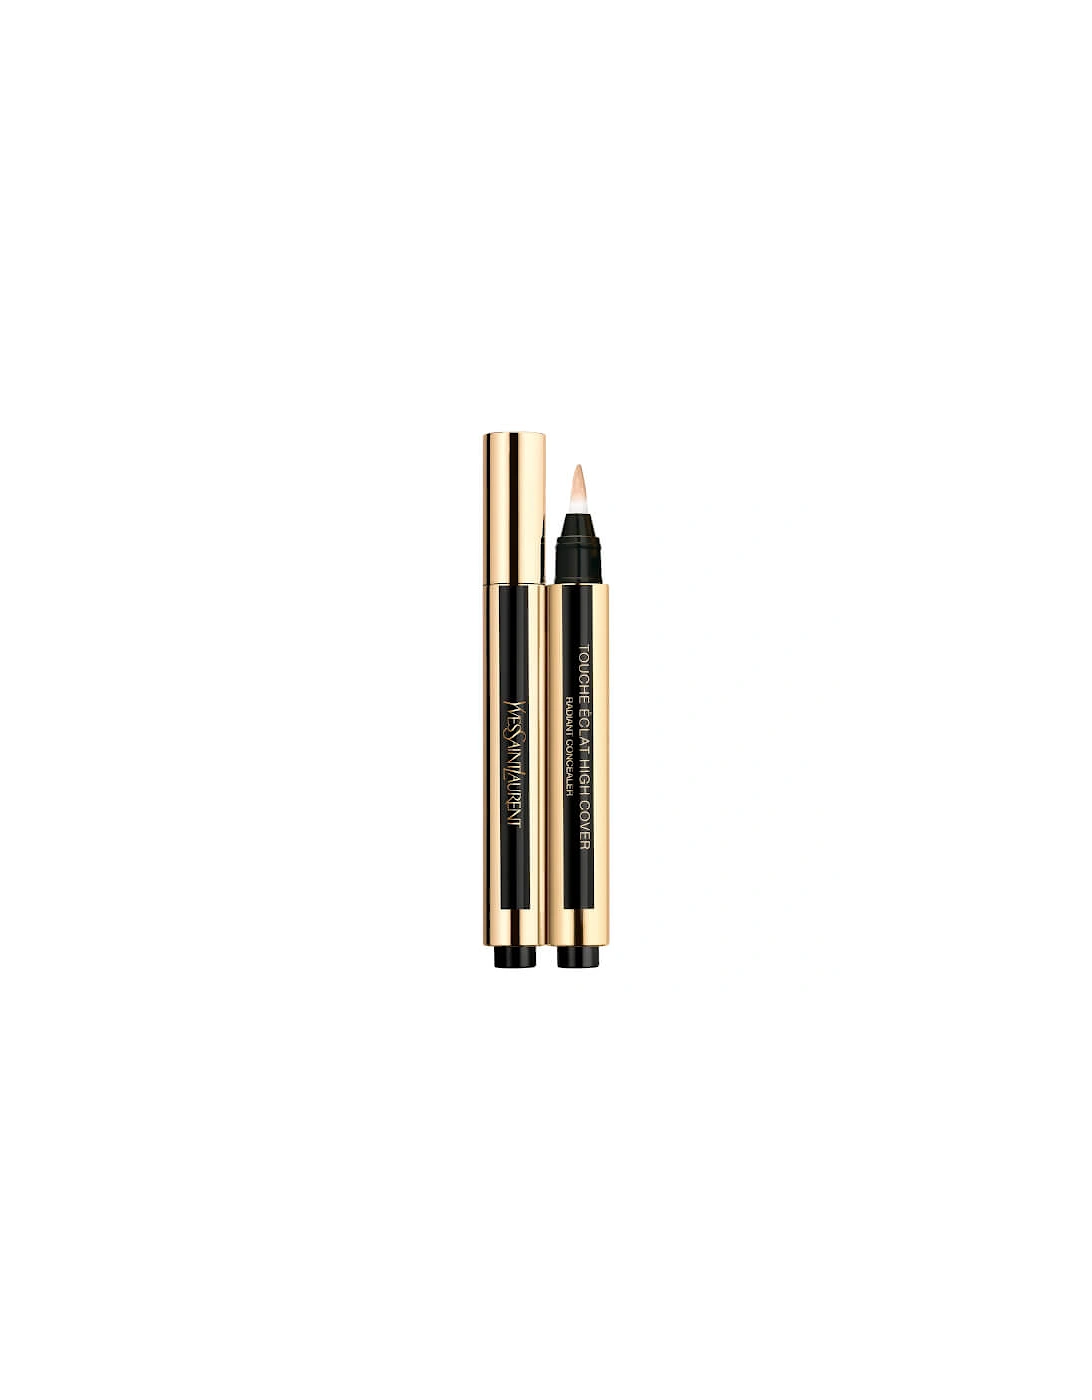 Yves Saint Laurent Touche Éclat High Cover Concealer - 2 Ivory, 2 of 1